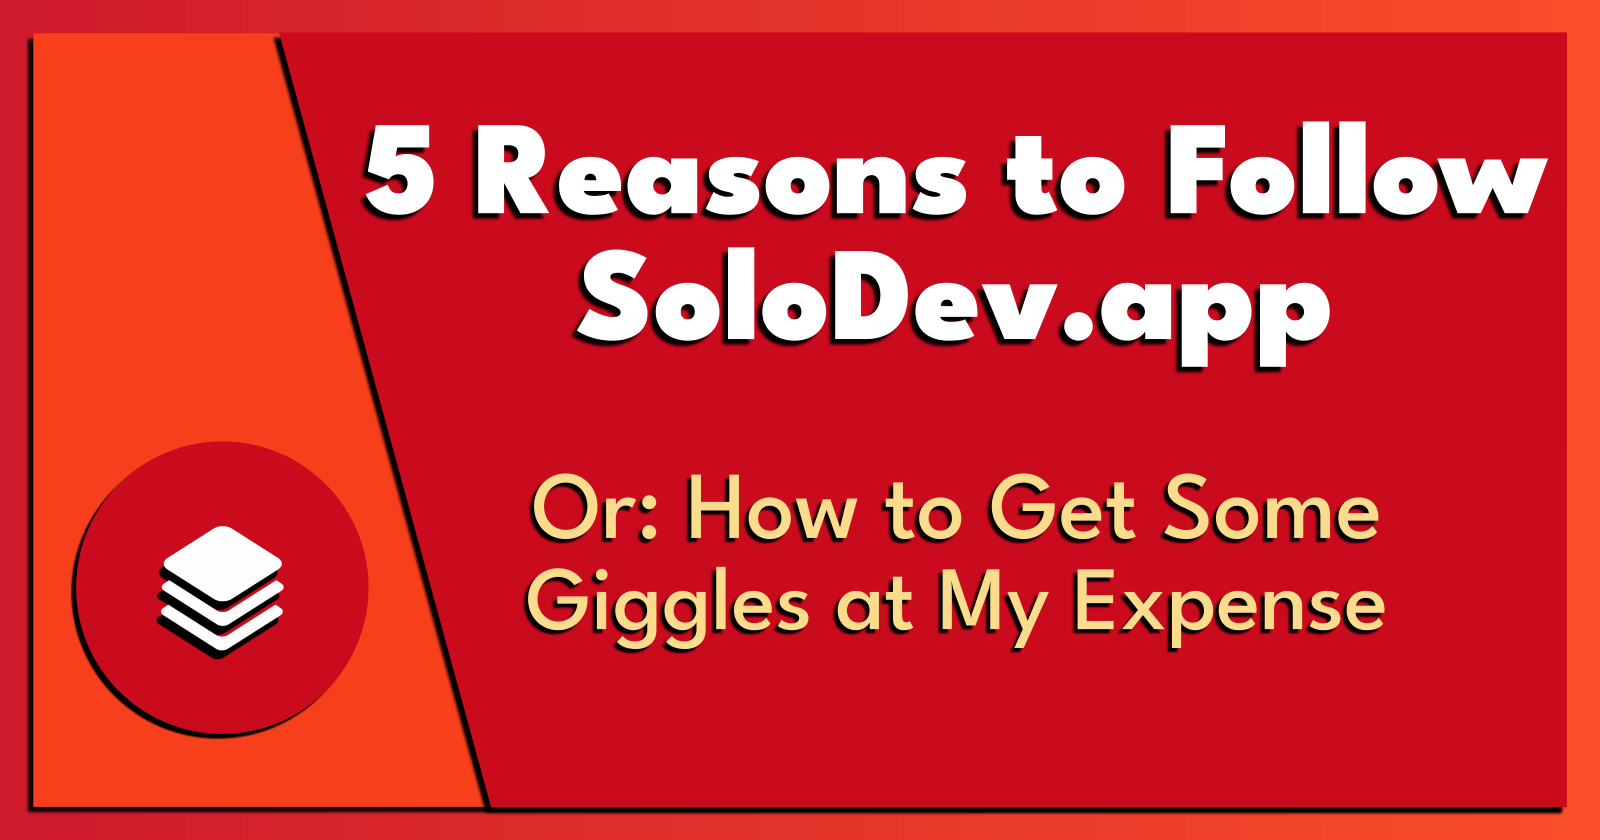 5 Reasons to Follow SoloDev.app.